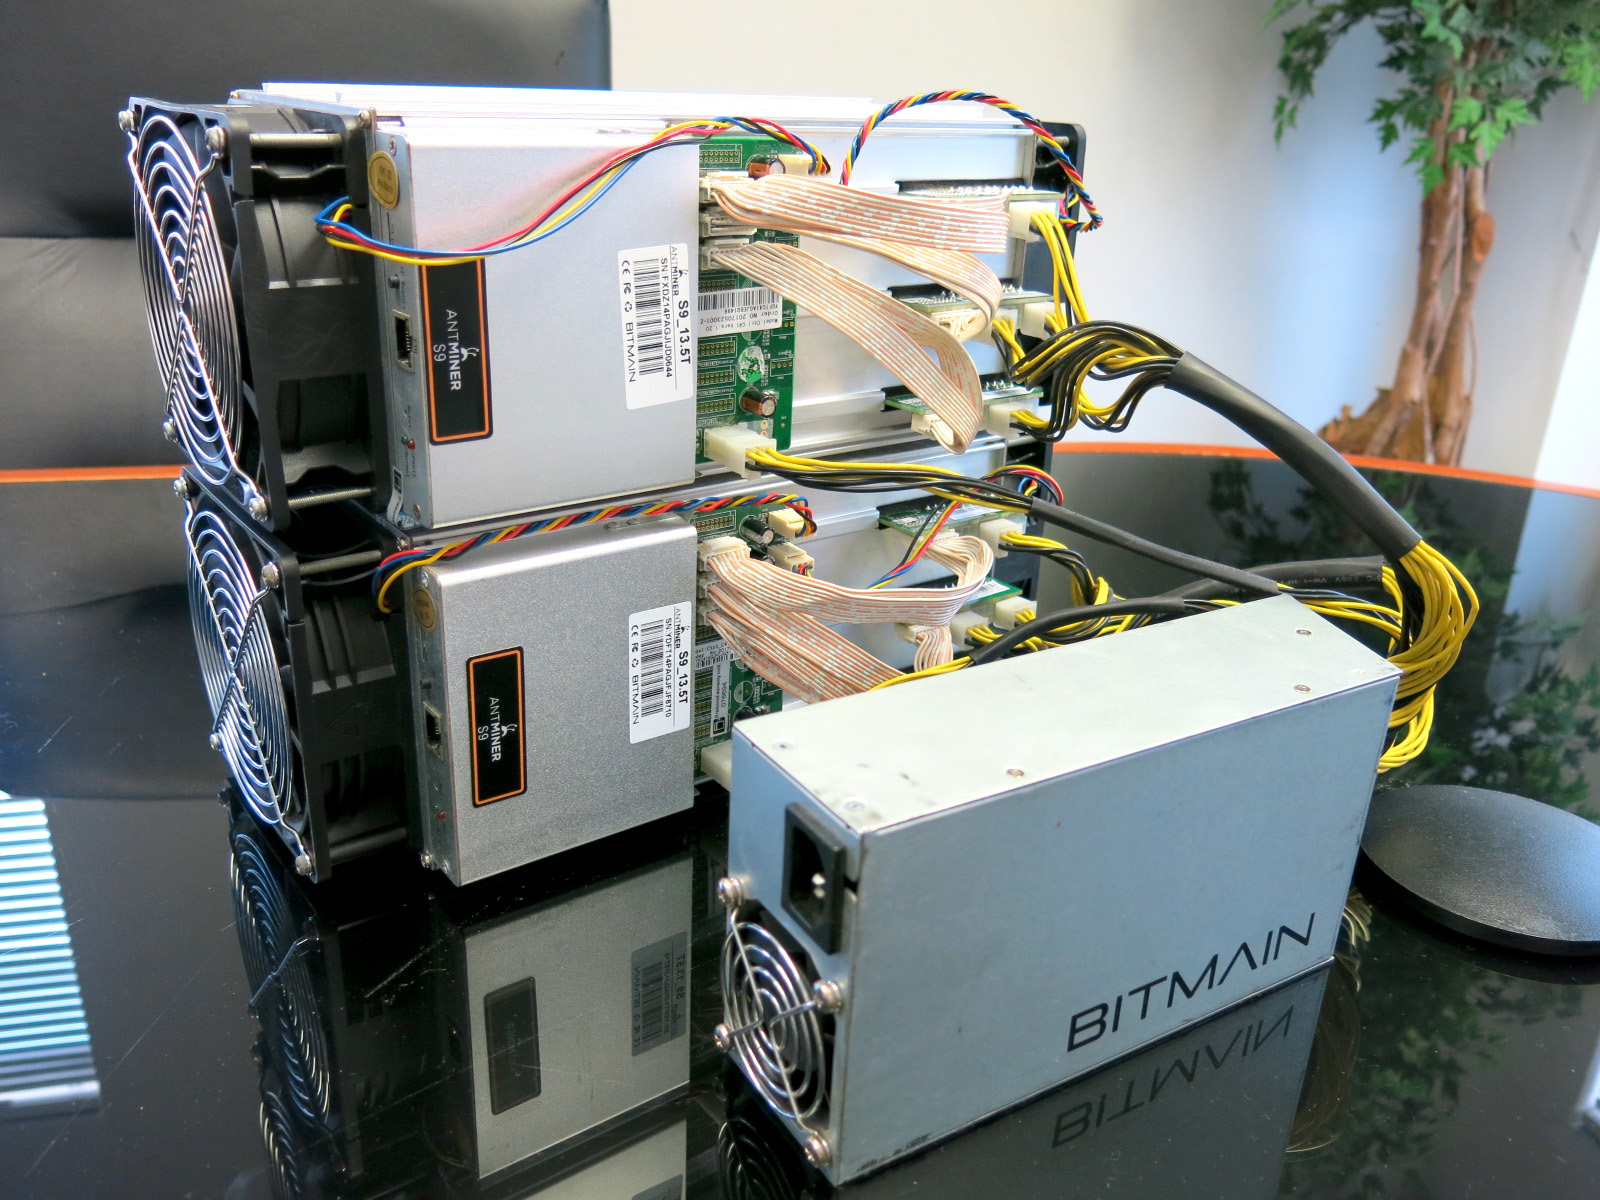 Antminer s21 hydro 335 th s. Bitmain Antminer s9 Dual. Antminer s9 Dual. ASIC s9 Dual. Antminer s9dual 22th/s.